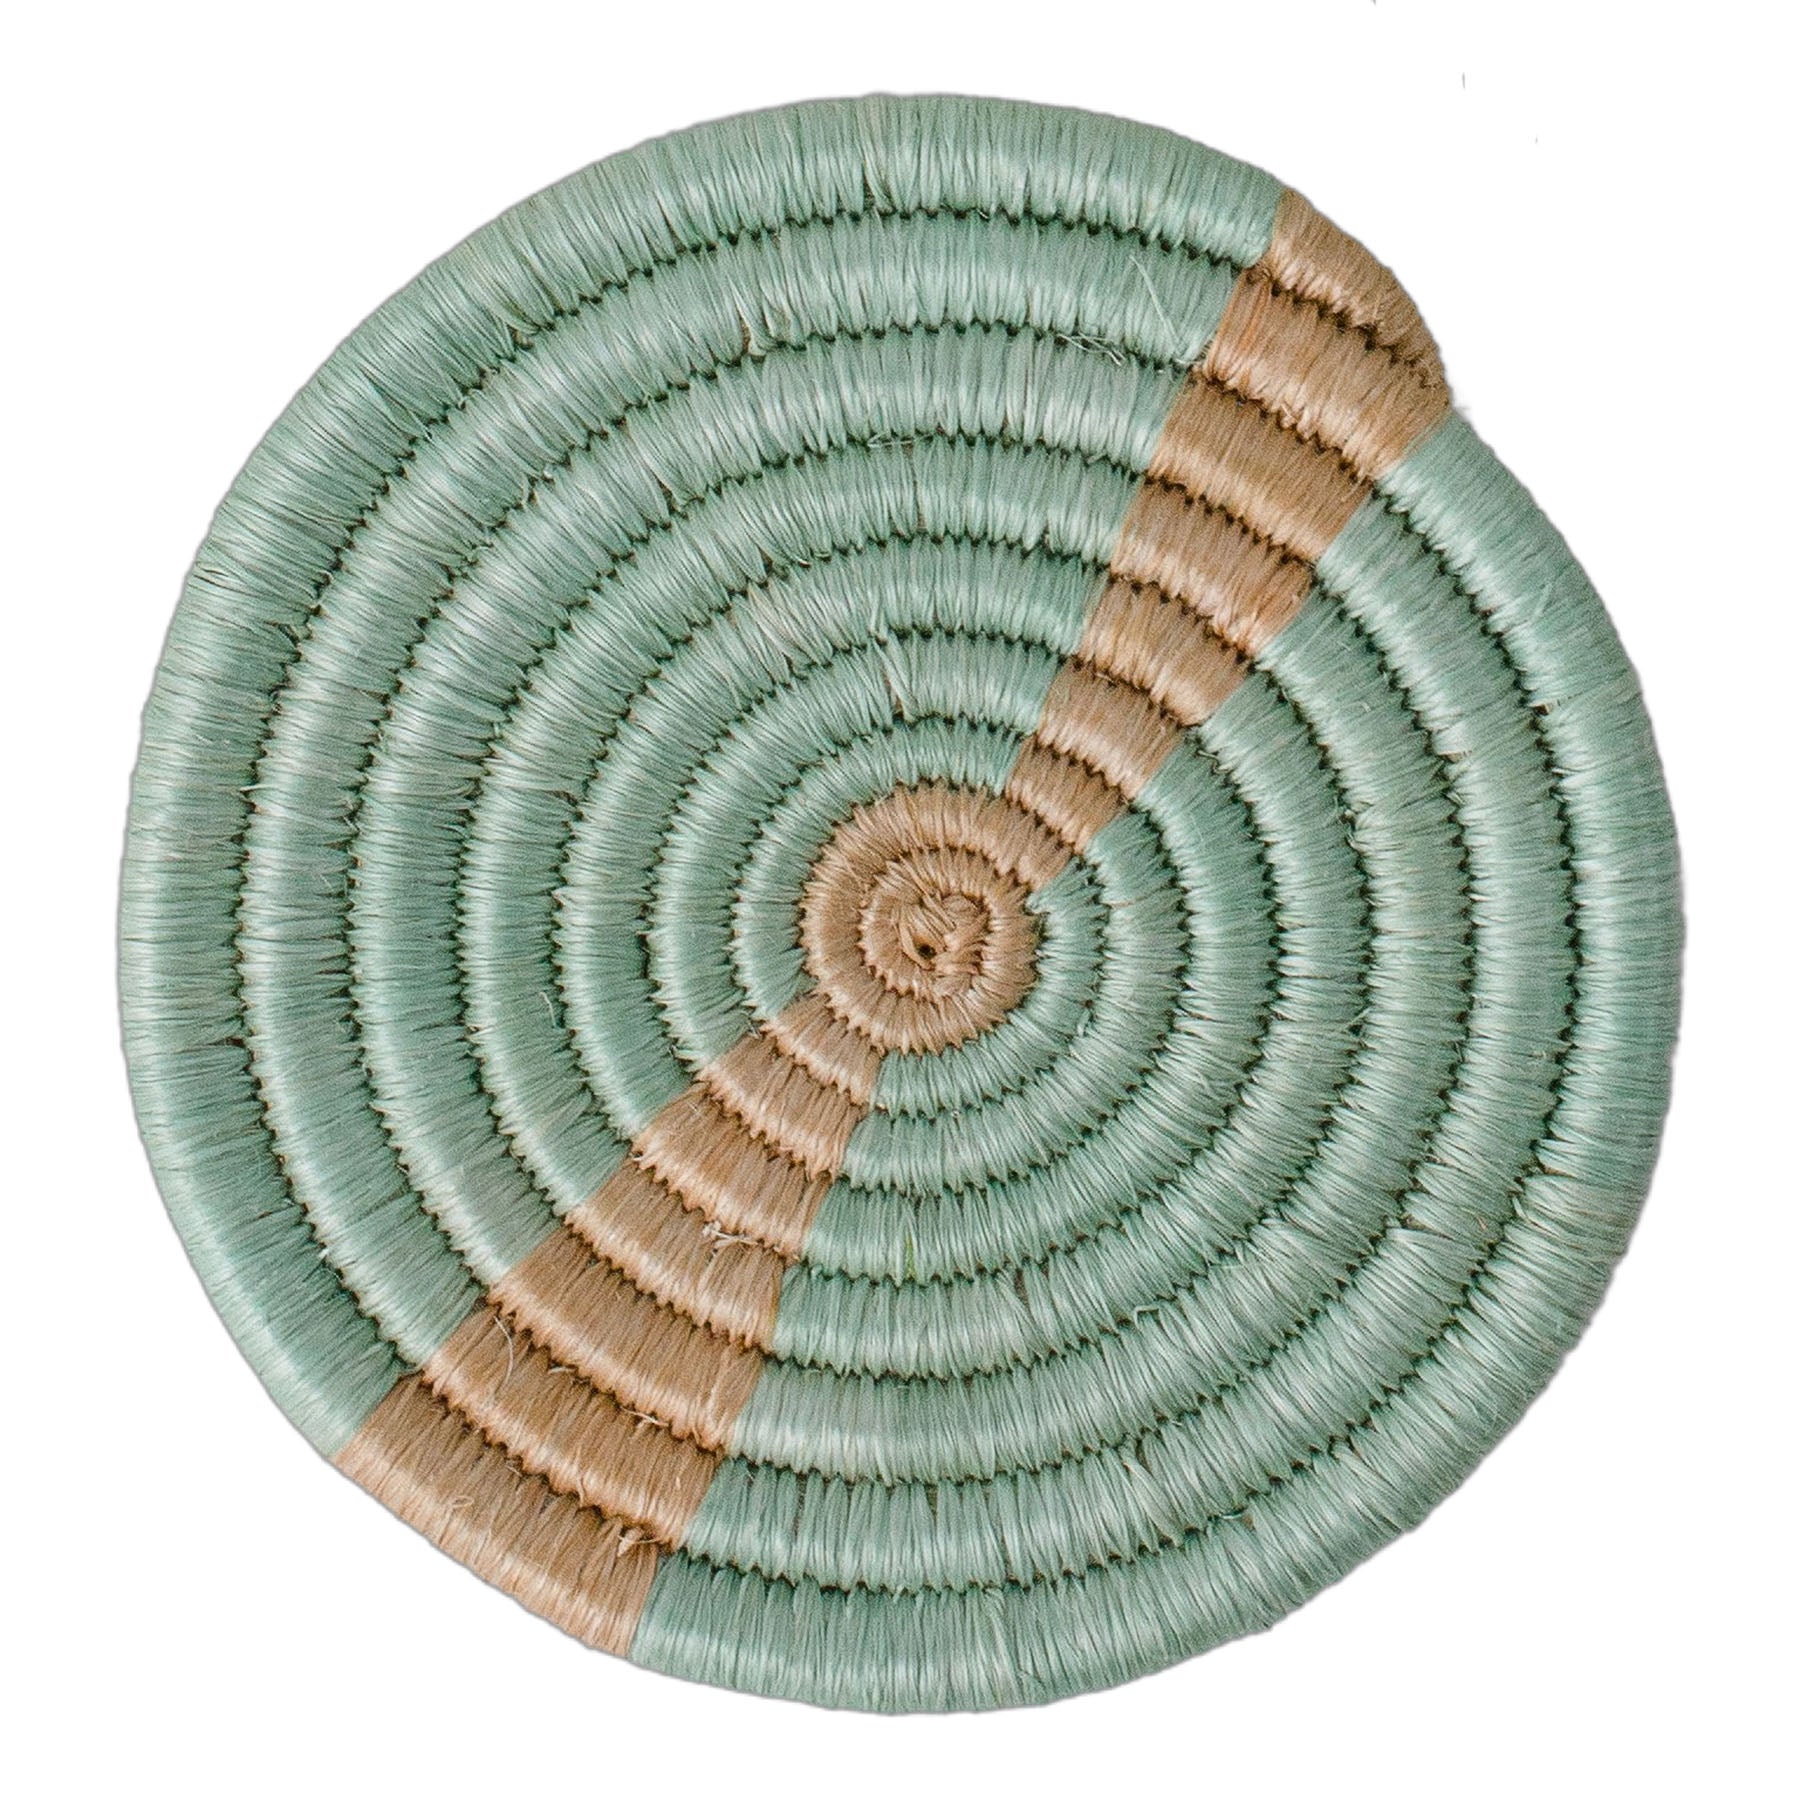 Set of 4 African coasters multicolored natural fiber